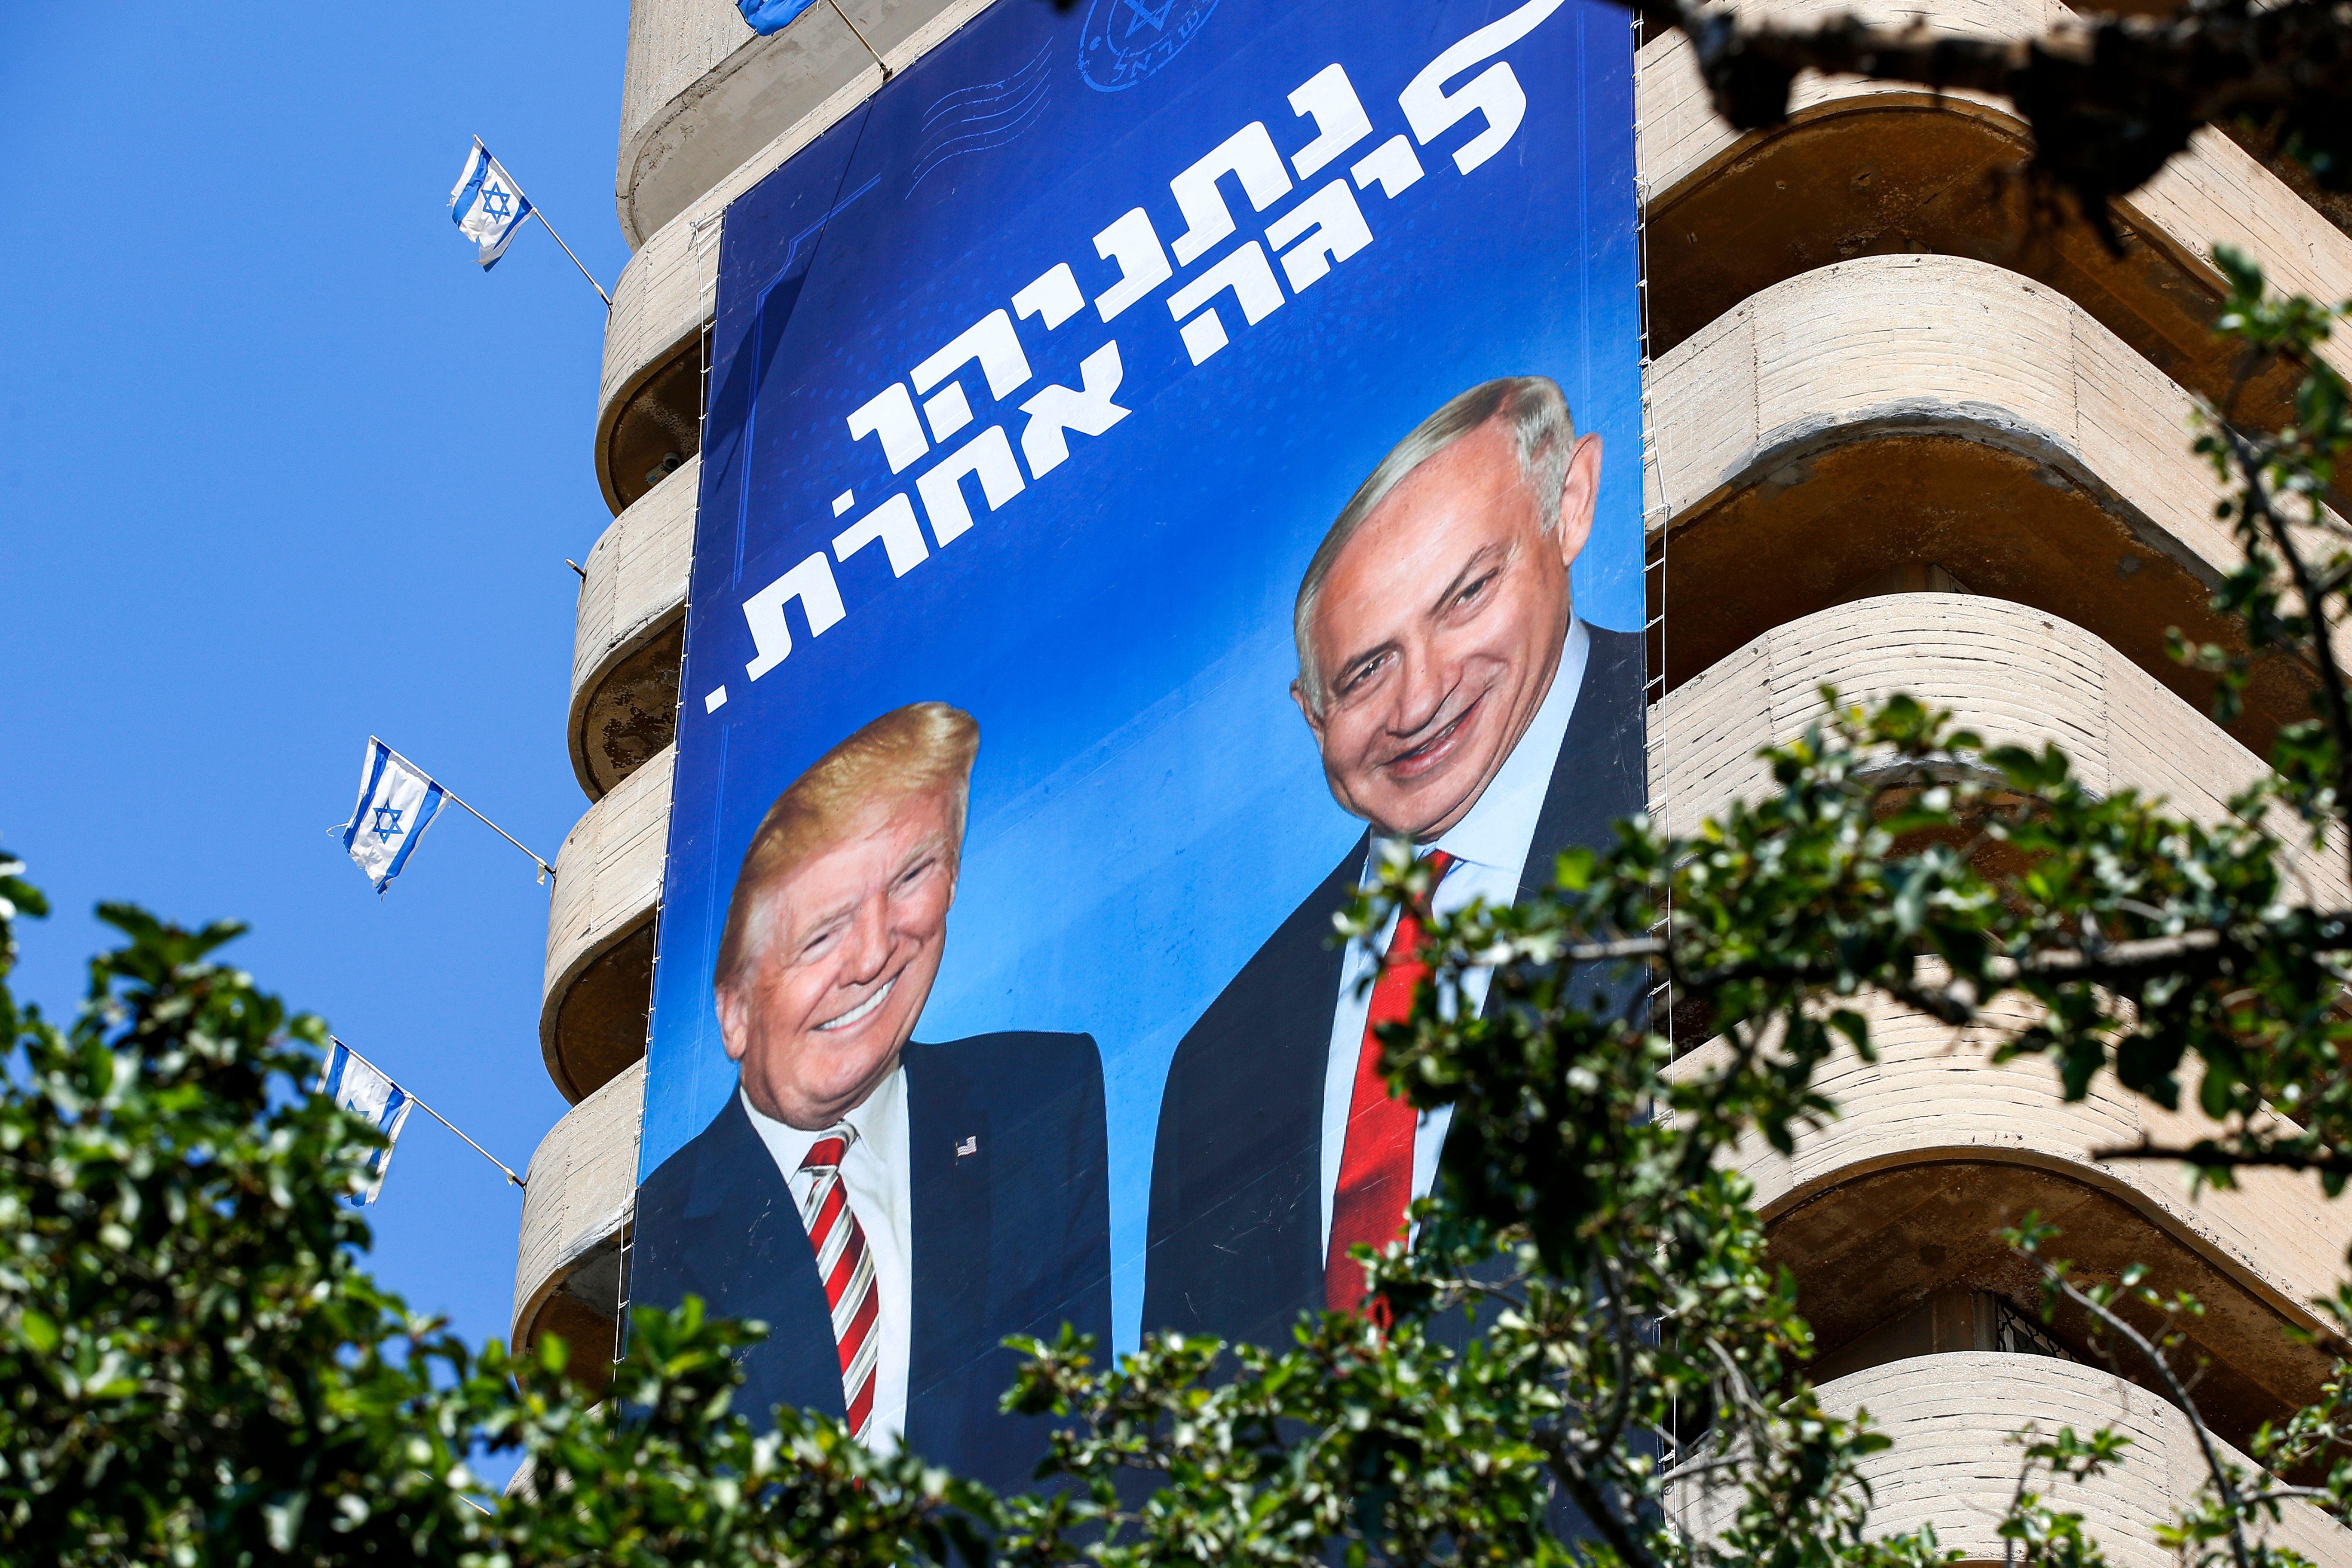 A giant Israeli Likud party election banner hanging from a building shows Benjamin Netanyahu with Donald Trump.